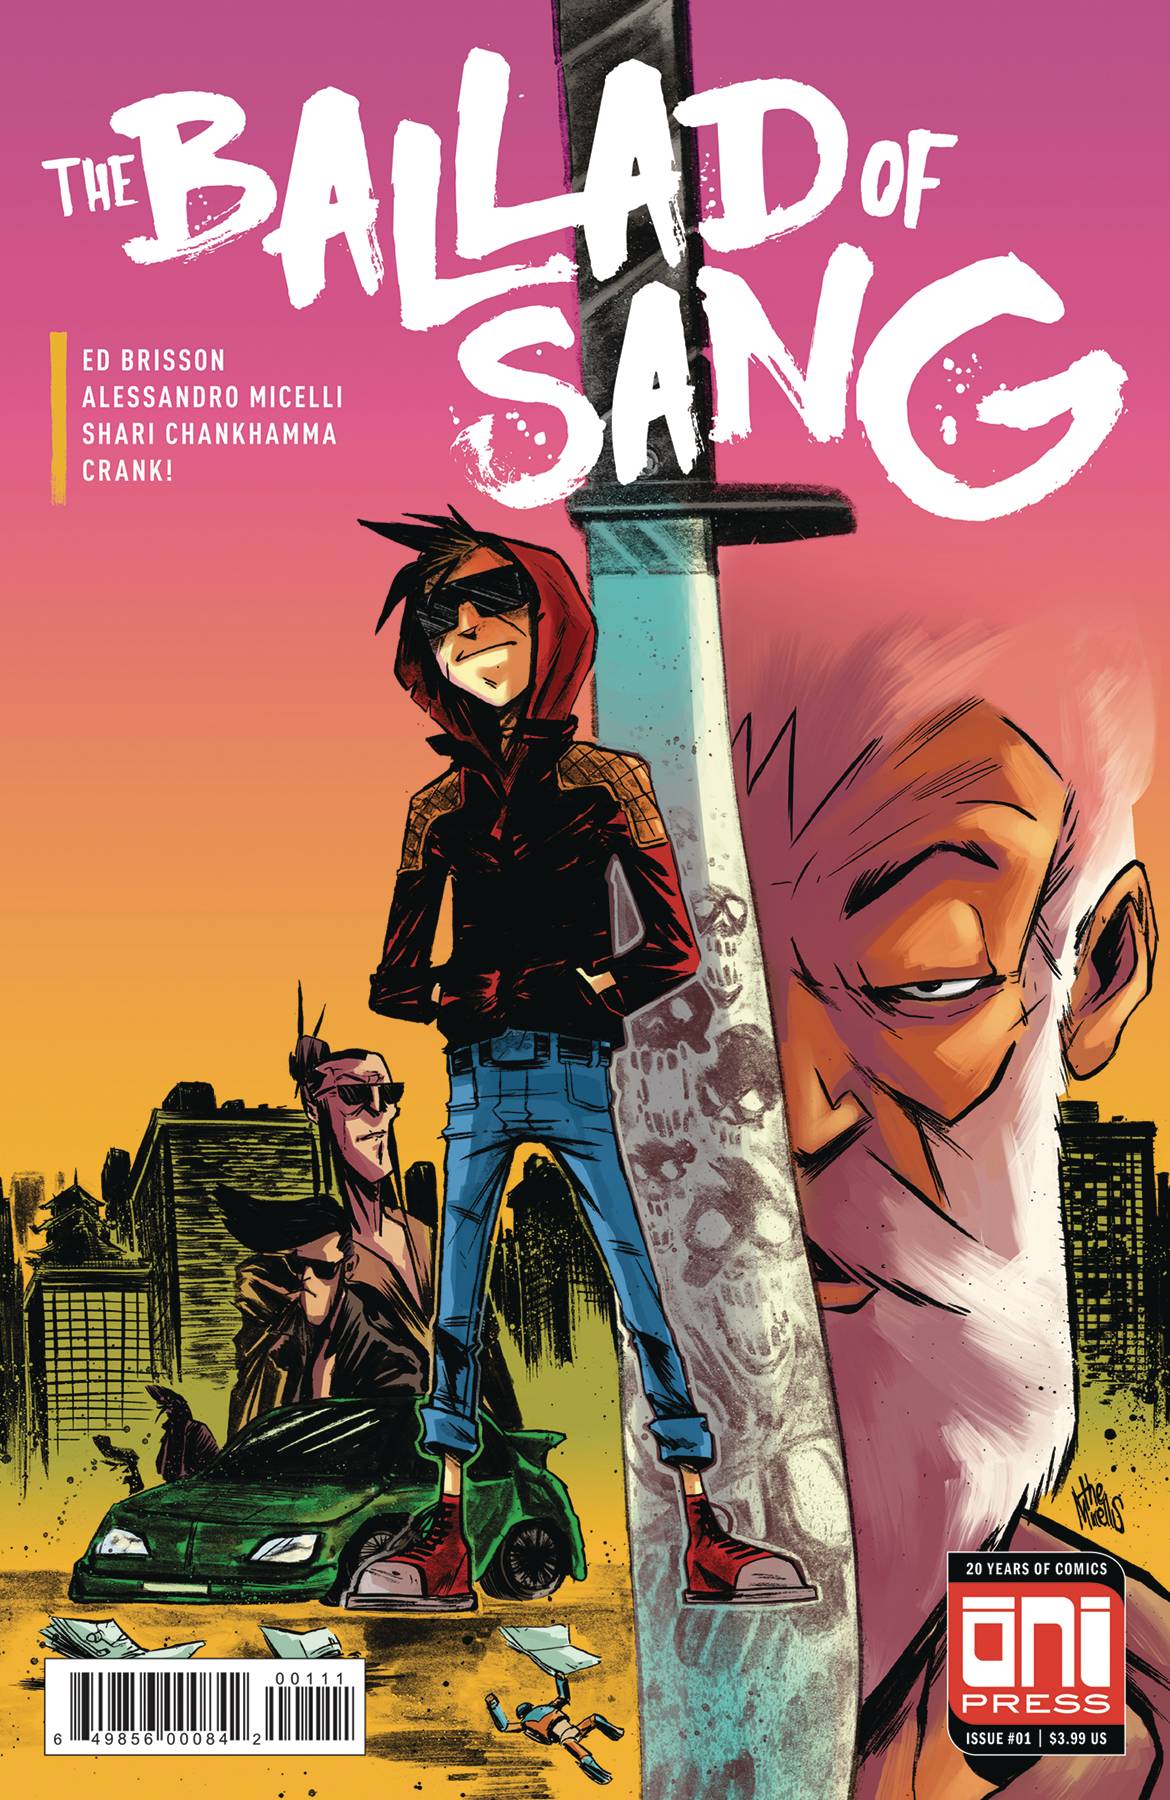 Ballad of Sang #1 Cover A (Mature) (Of 5)